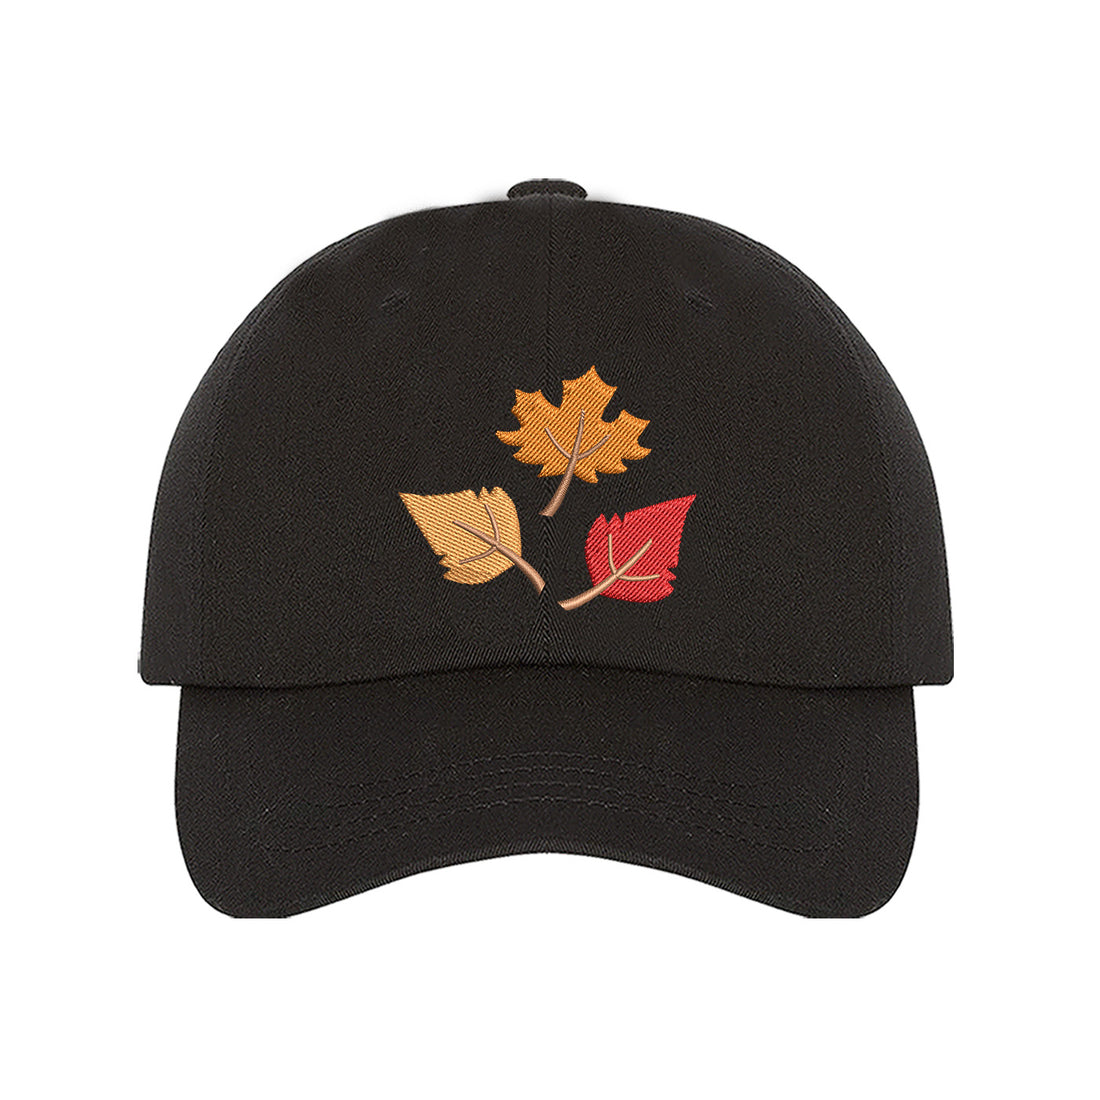  Black baseball cap embroidered with Leaves - DSY Lifestyle